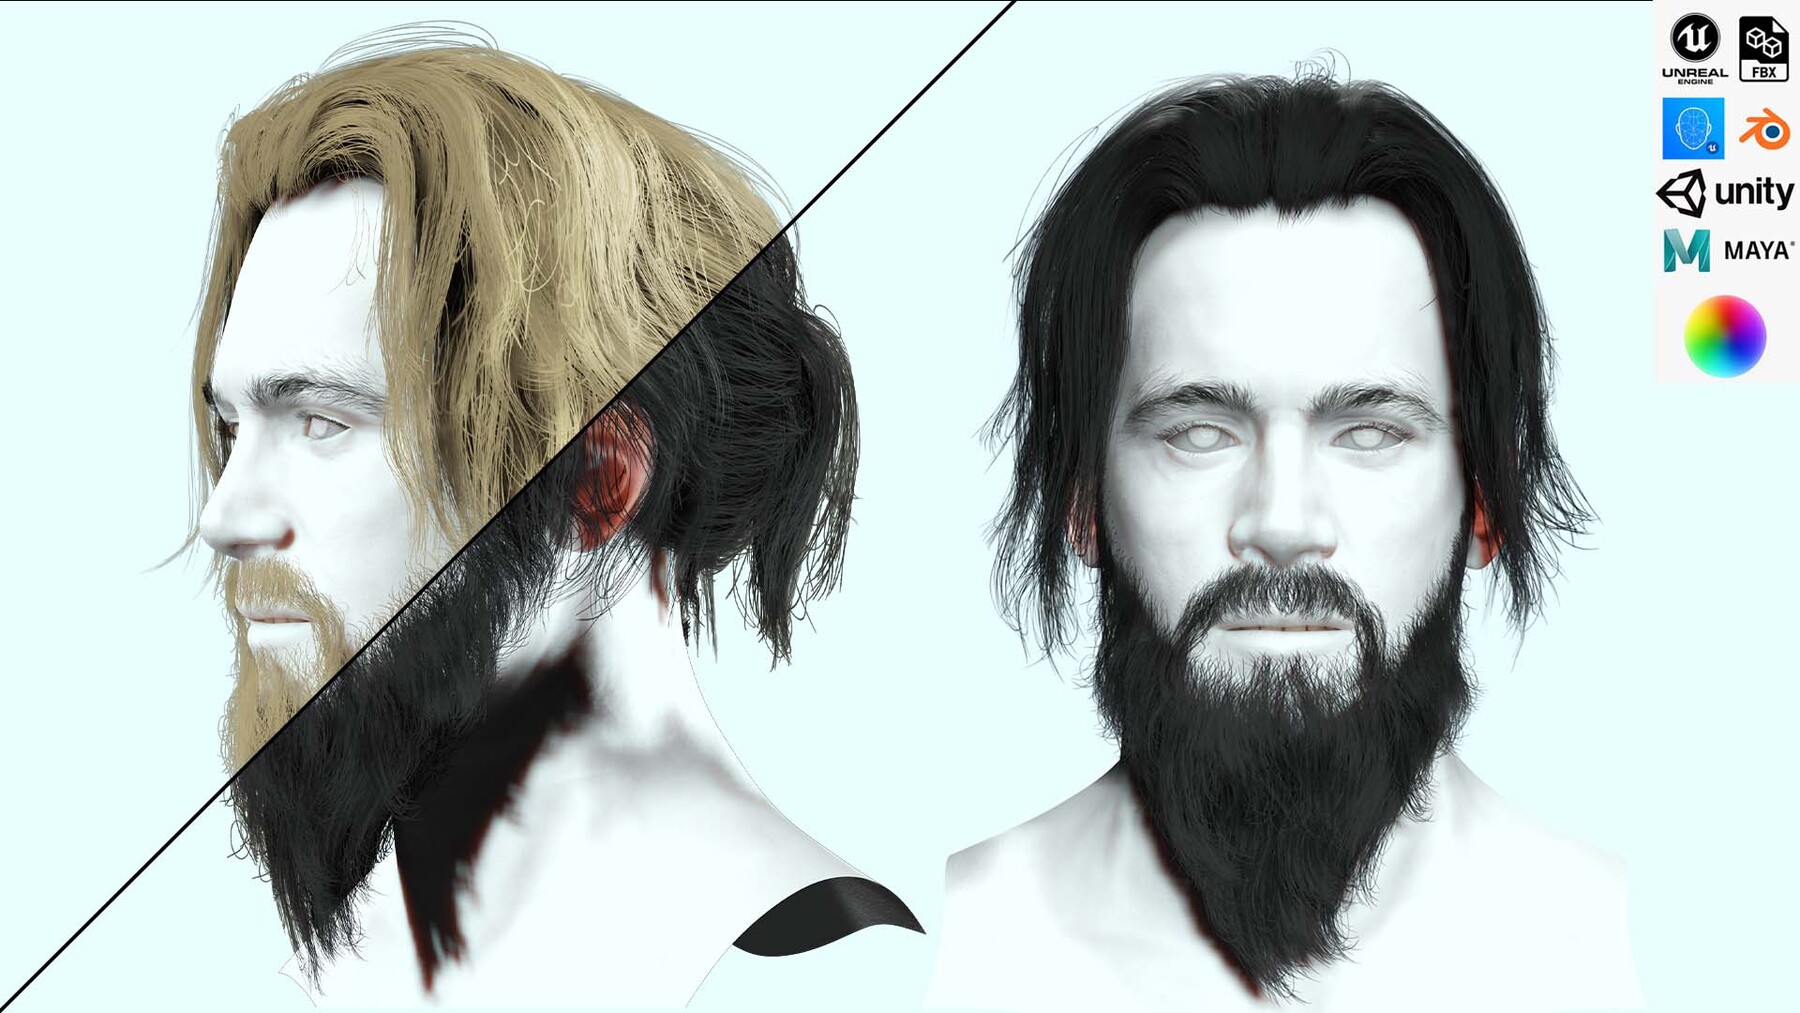 ArtStation - Male hair 4 colors low poly